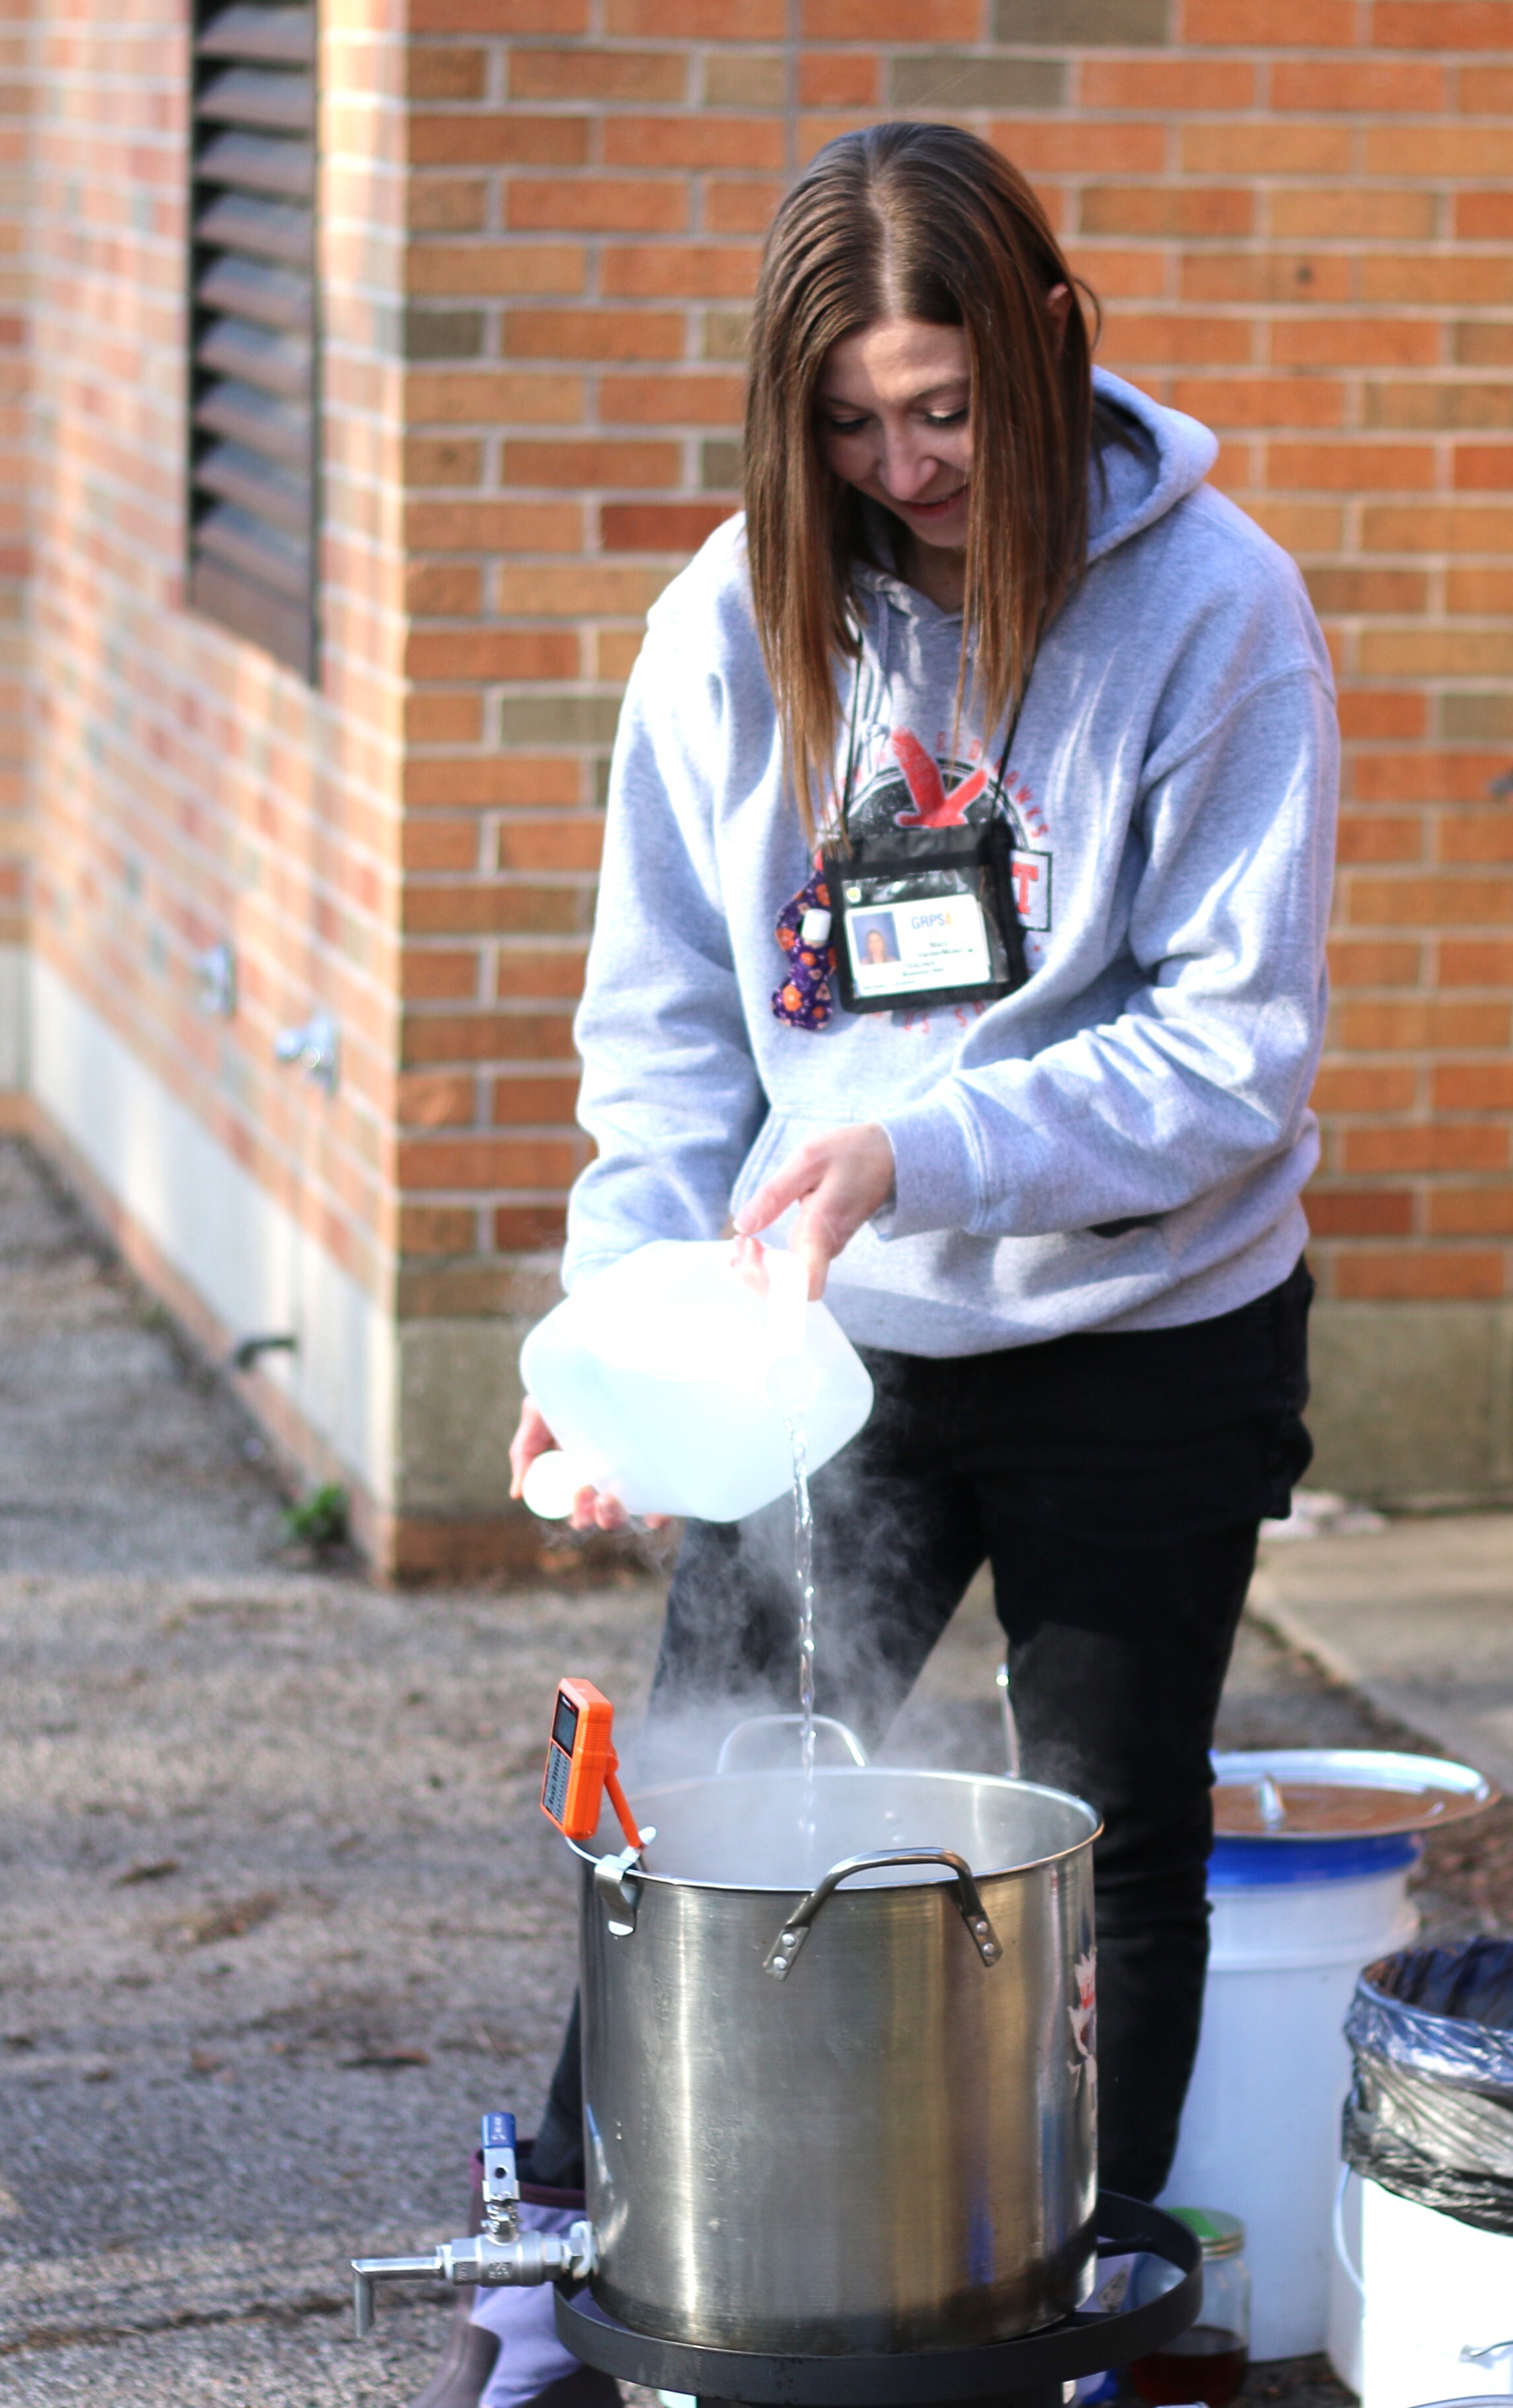 Adding sap as part of the boiling off process to create maple syrup